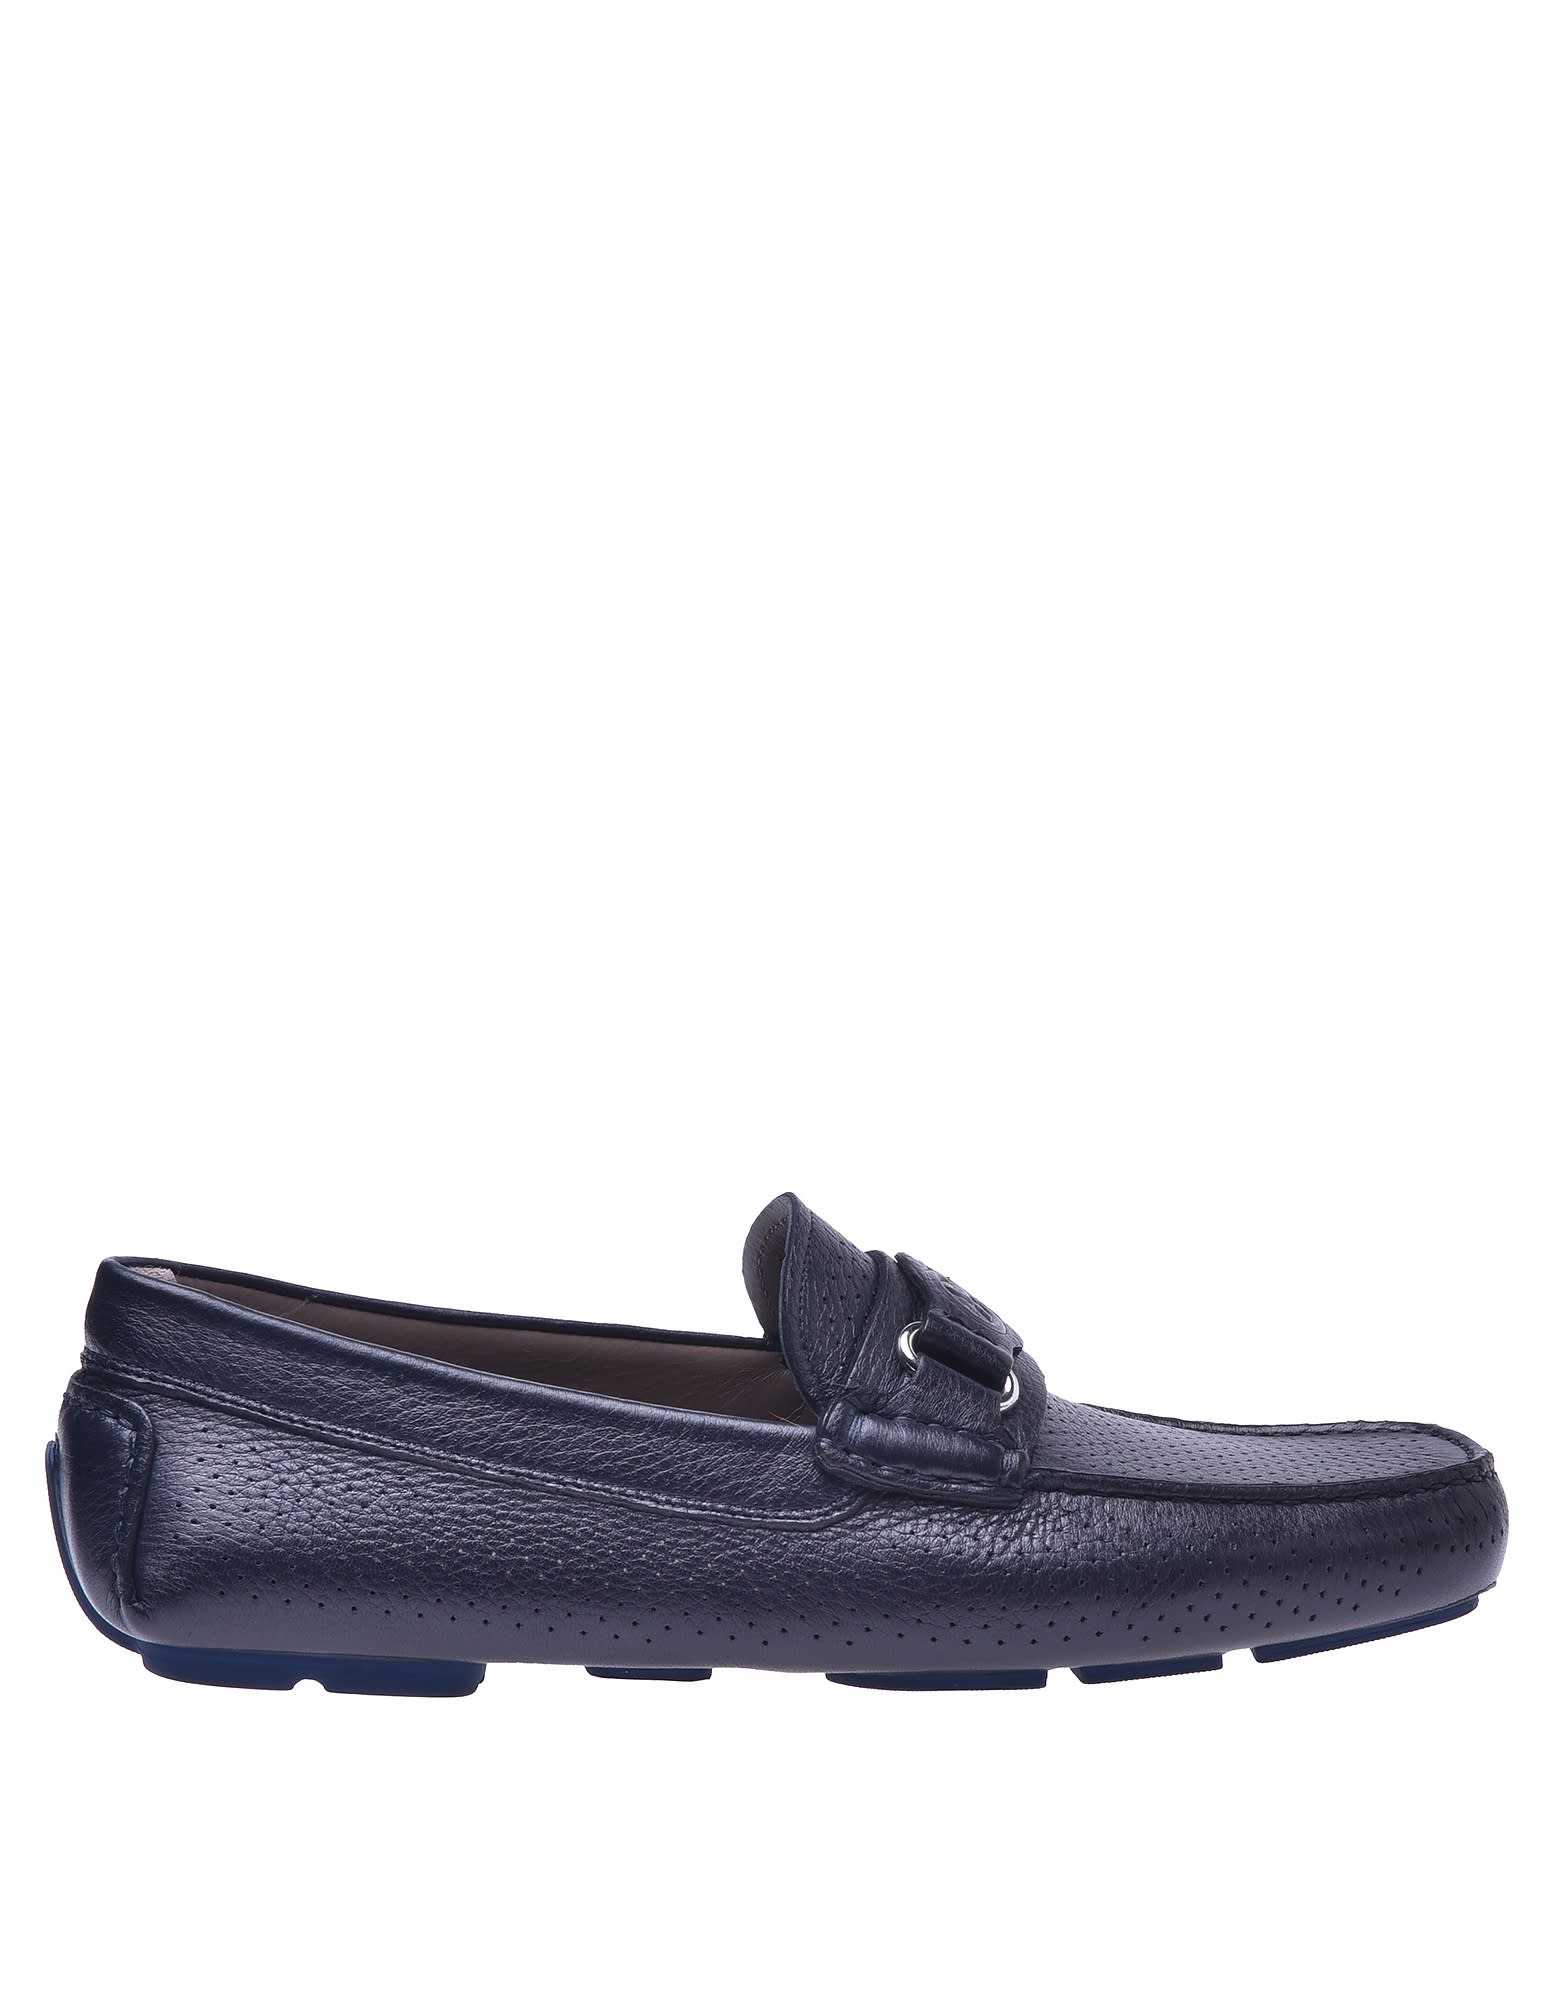 Baldinini Navy Blue Perforated Leather Driving Loafers